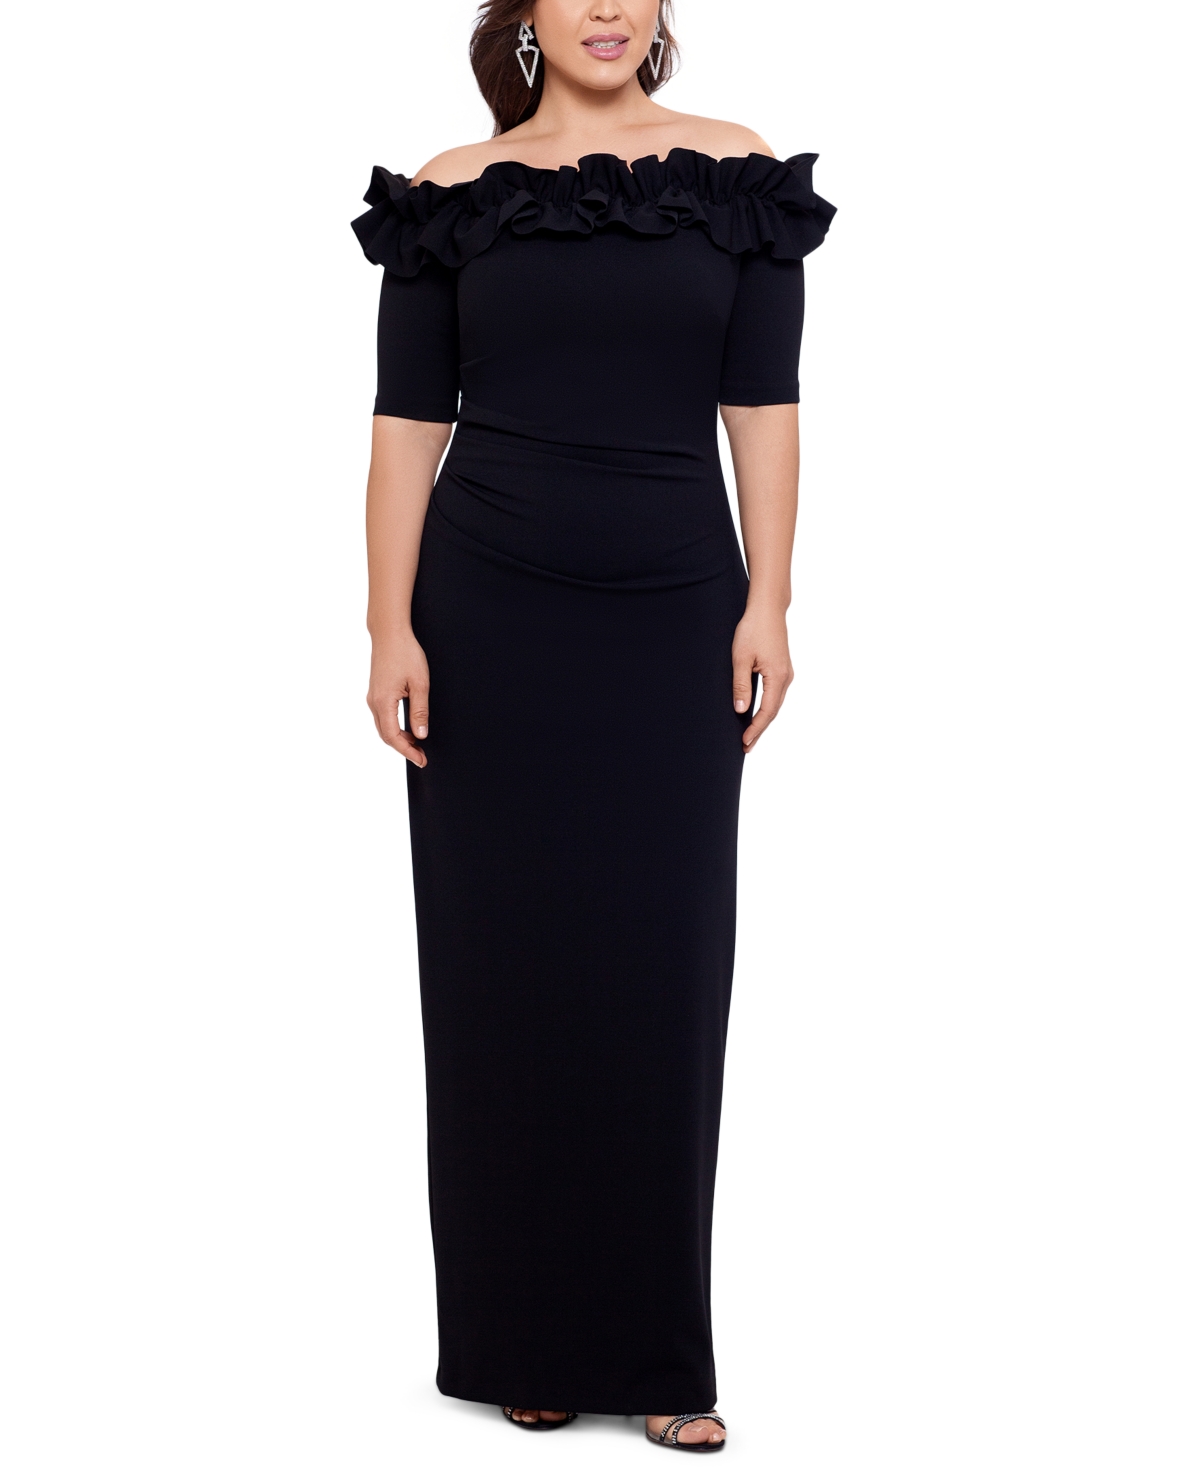 Plus Size Ruffled Off-The-Shoulder Gown - Black